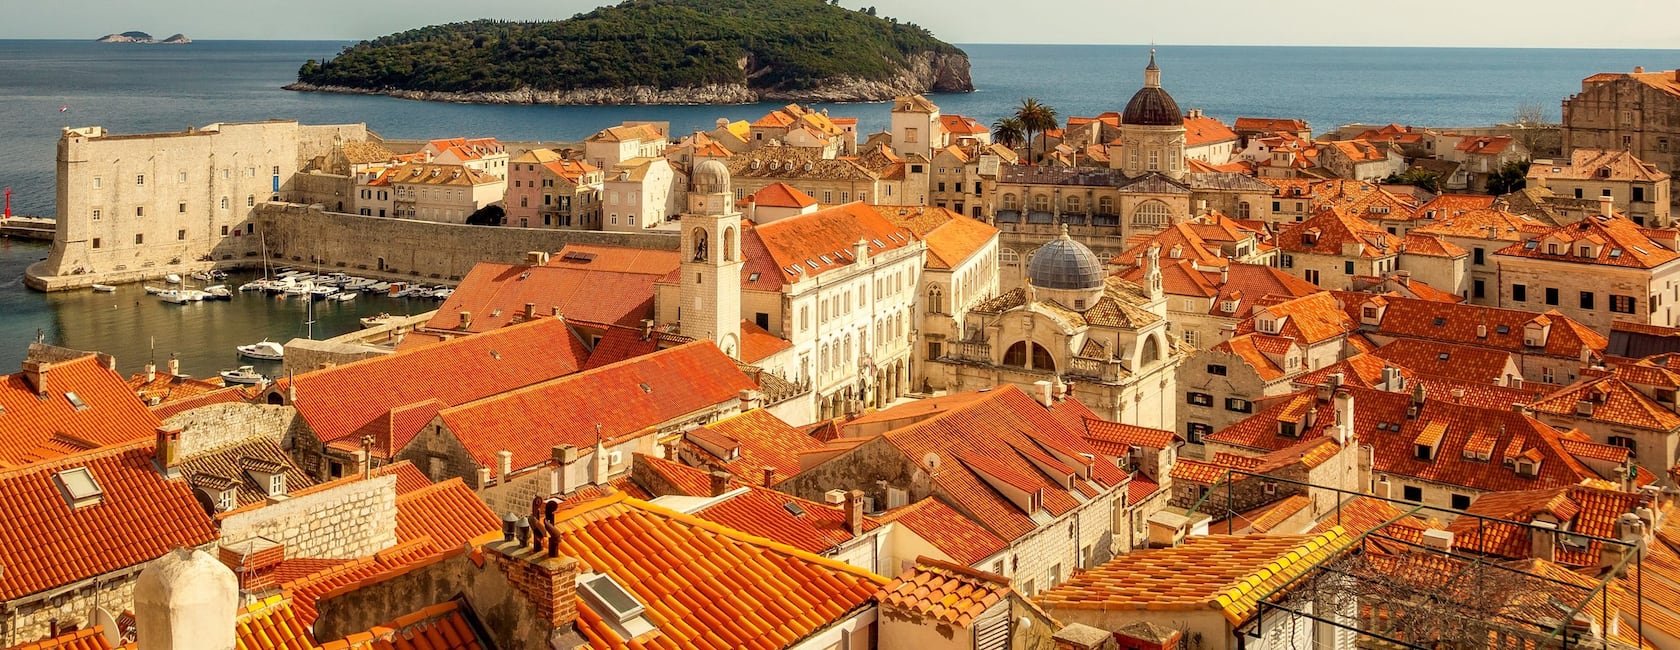 Dubrovnik Apartment Rentals | House and Apartment Rentals | Airbnb